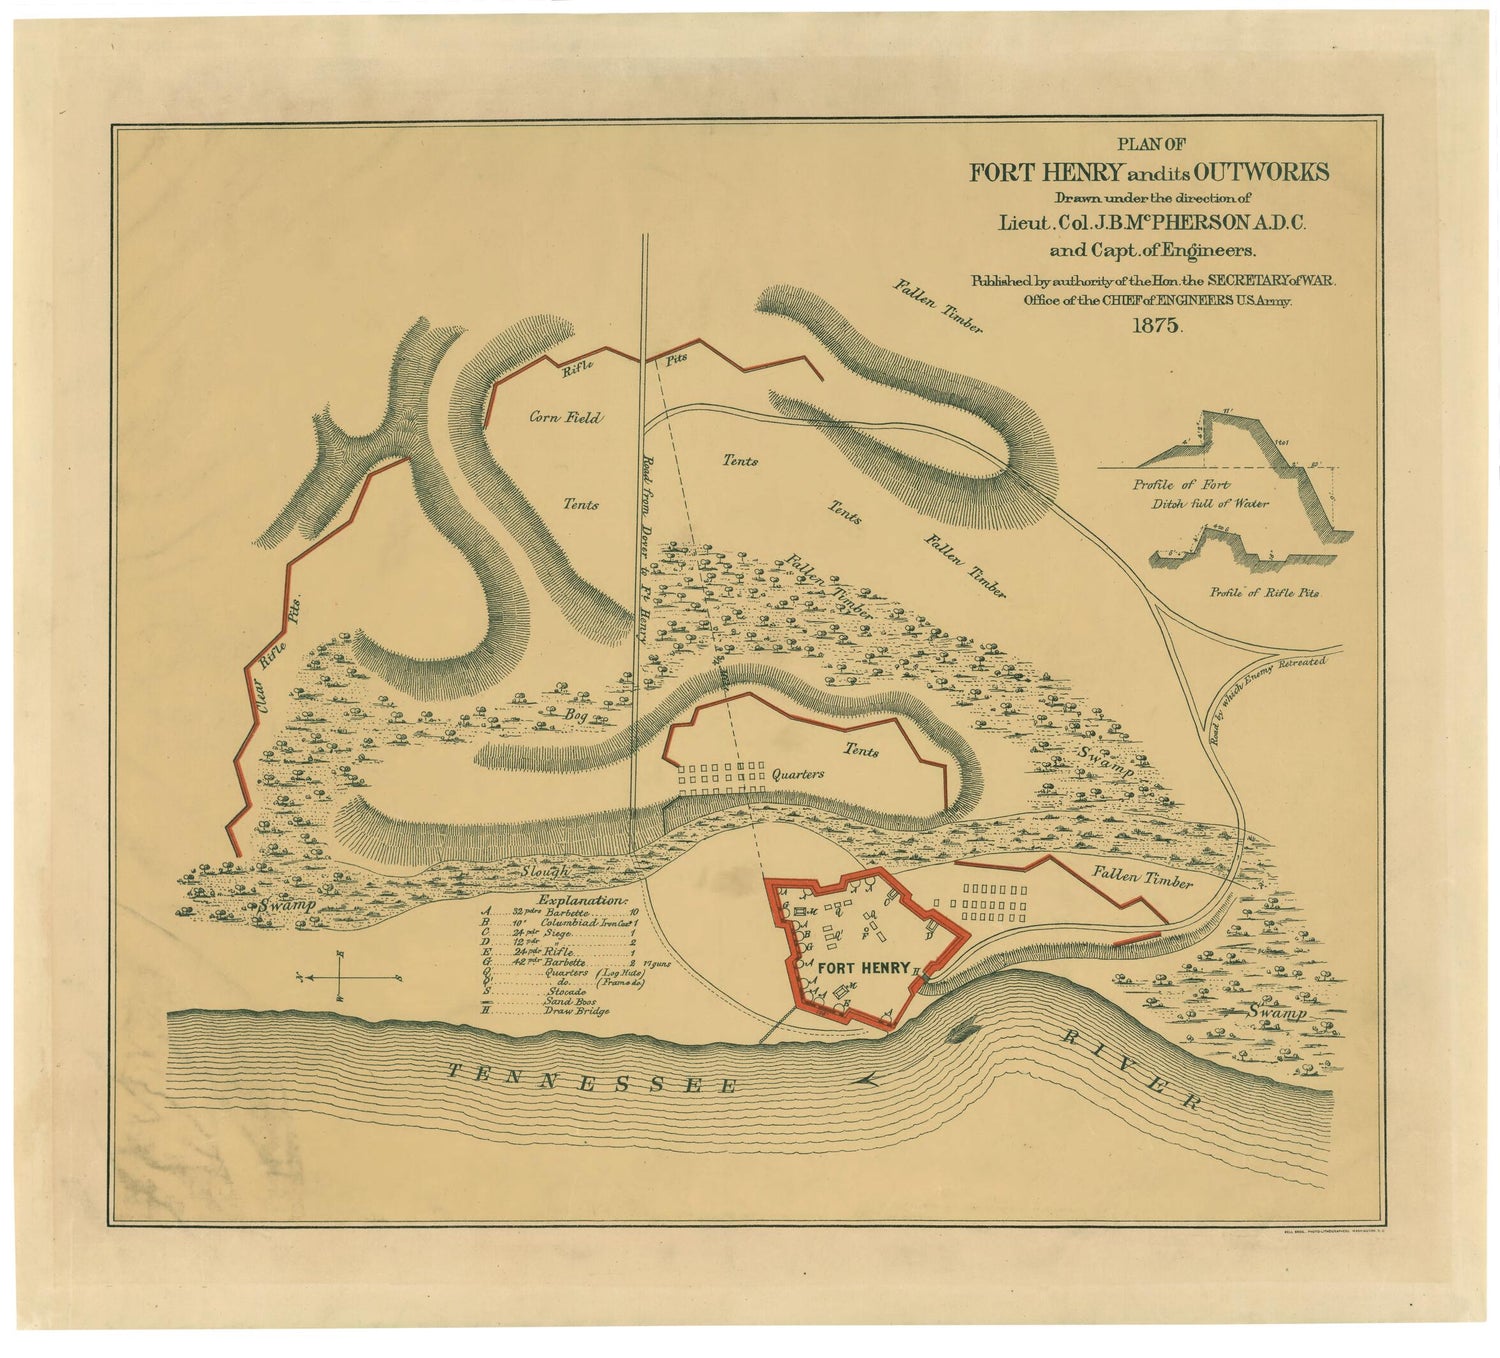 This old map of Plan of Fort Henry and Its Outworks from 1875 was created by James Birdseye McPherson,  United States. Army. Corps of Engineers in 1875